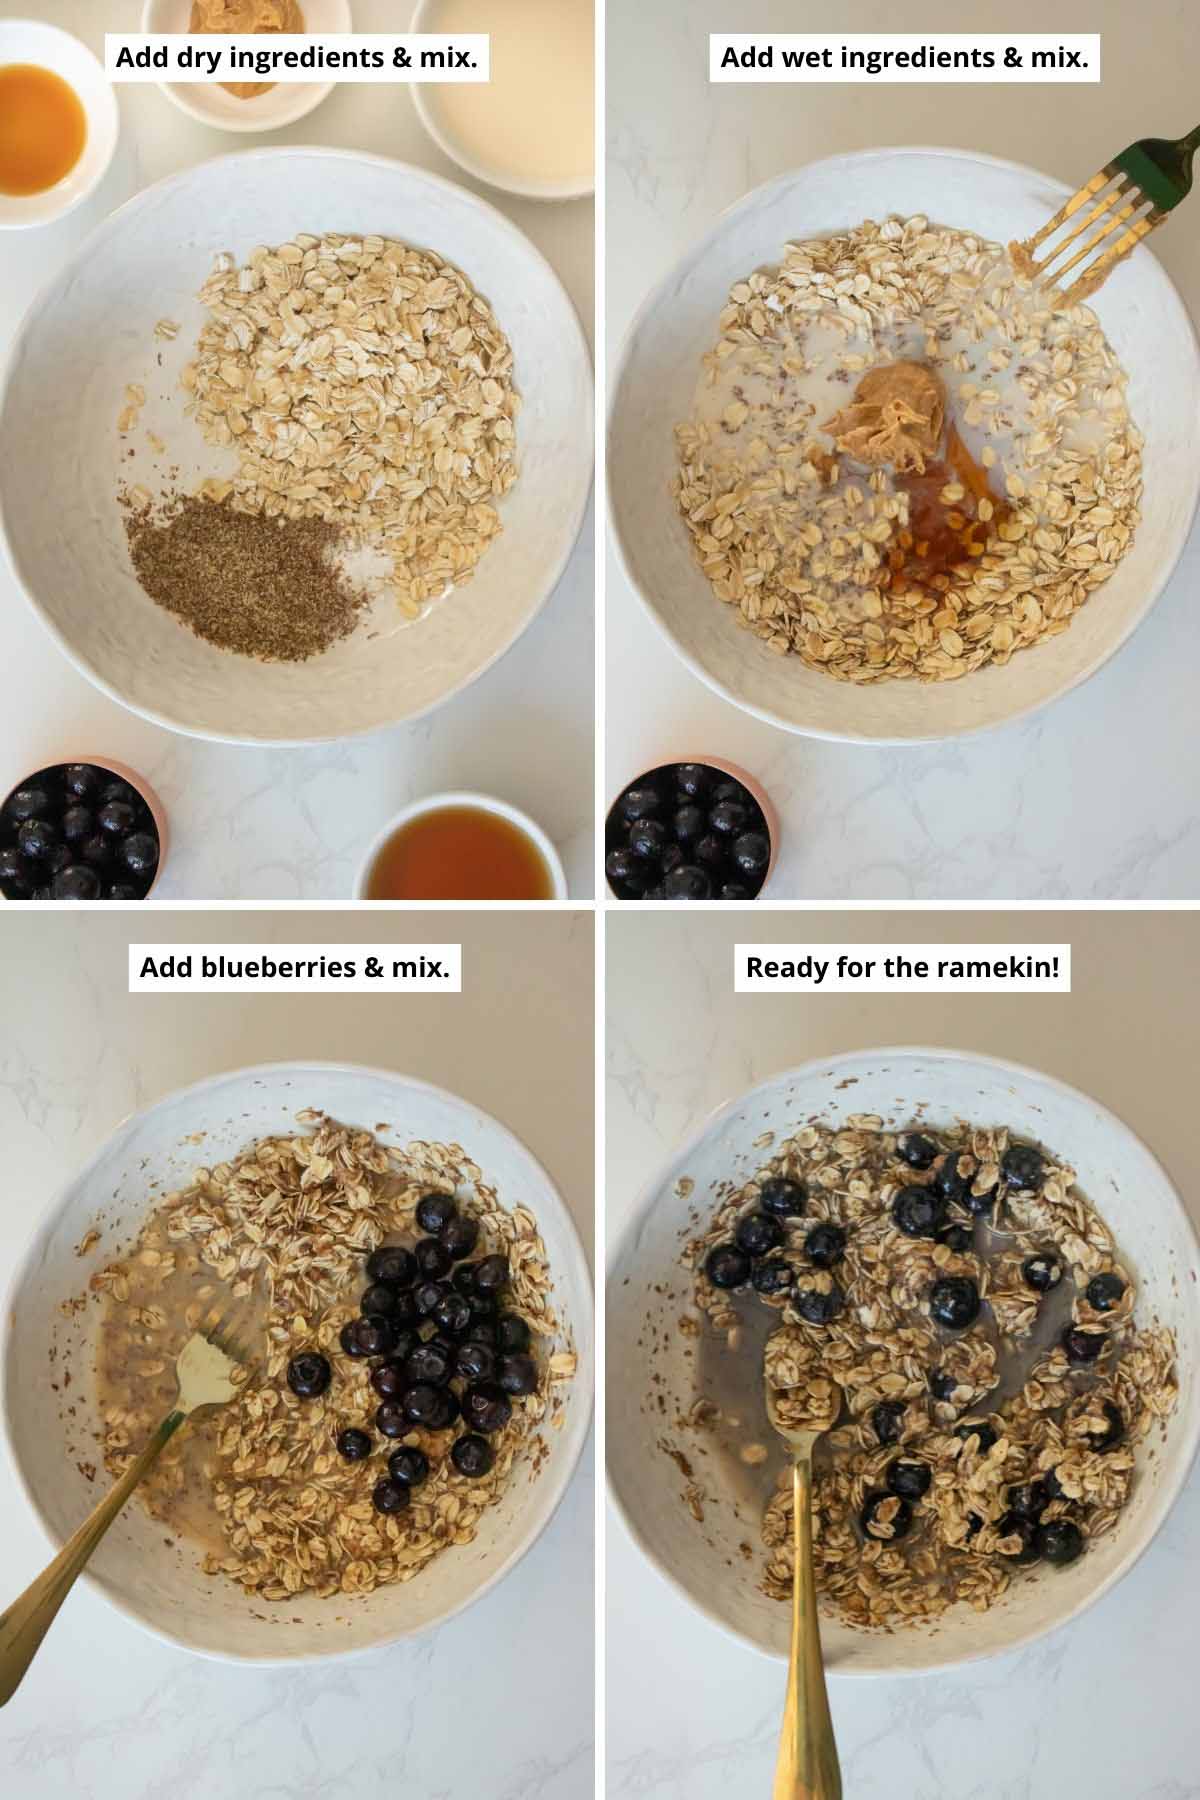 image collage showing the dry ingredients, adding the wet ingredients, adding the blueberries, and the oats mixture ready to cook